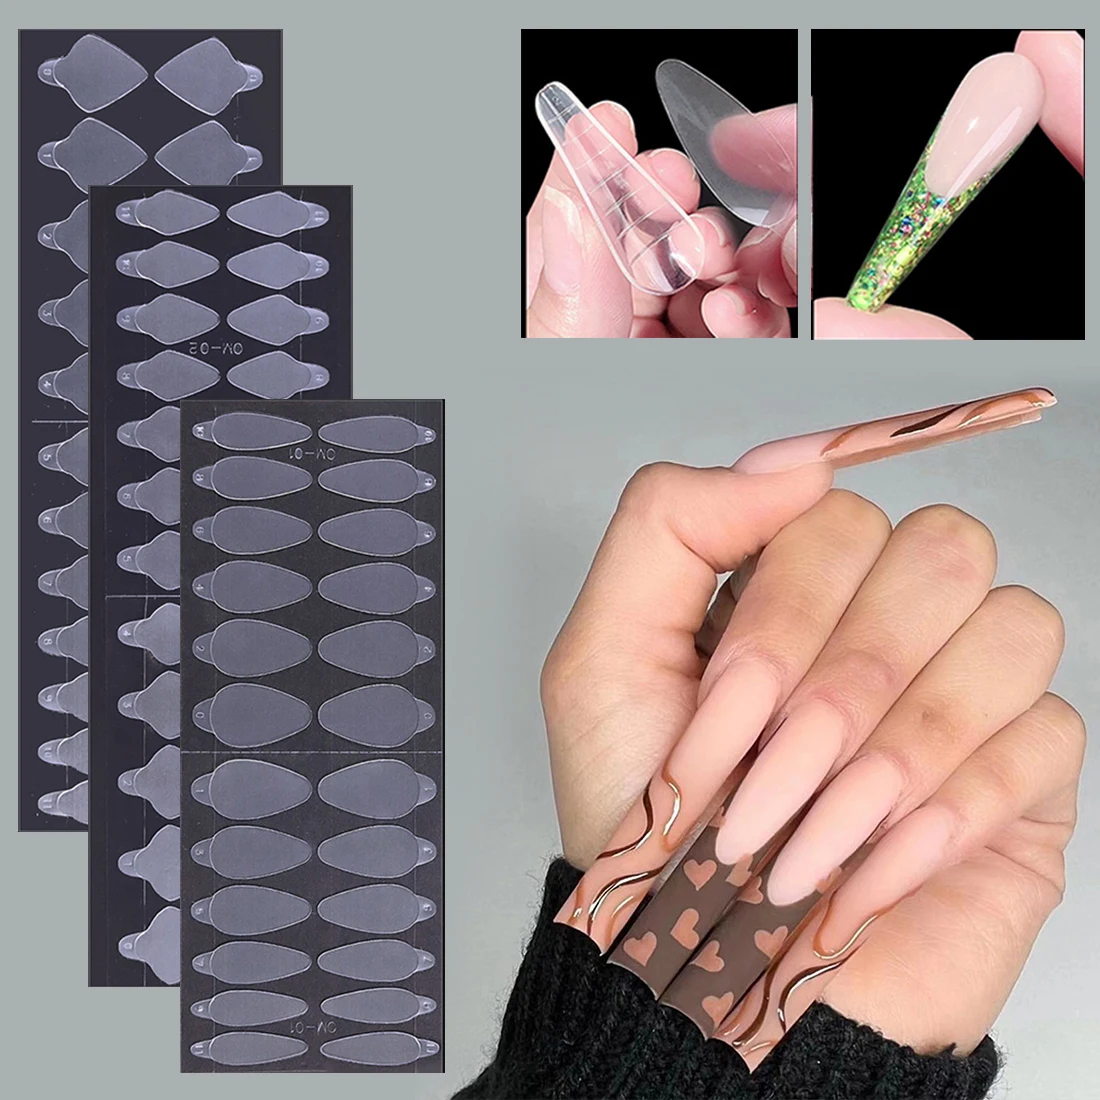 

24pcs Dual Nail Forms Silicone French Forma Sticker Acrylic Aquarium Nail Tips Reusable Extension Molds Manicure Tools